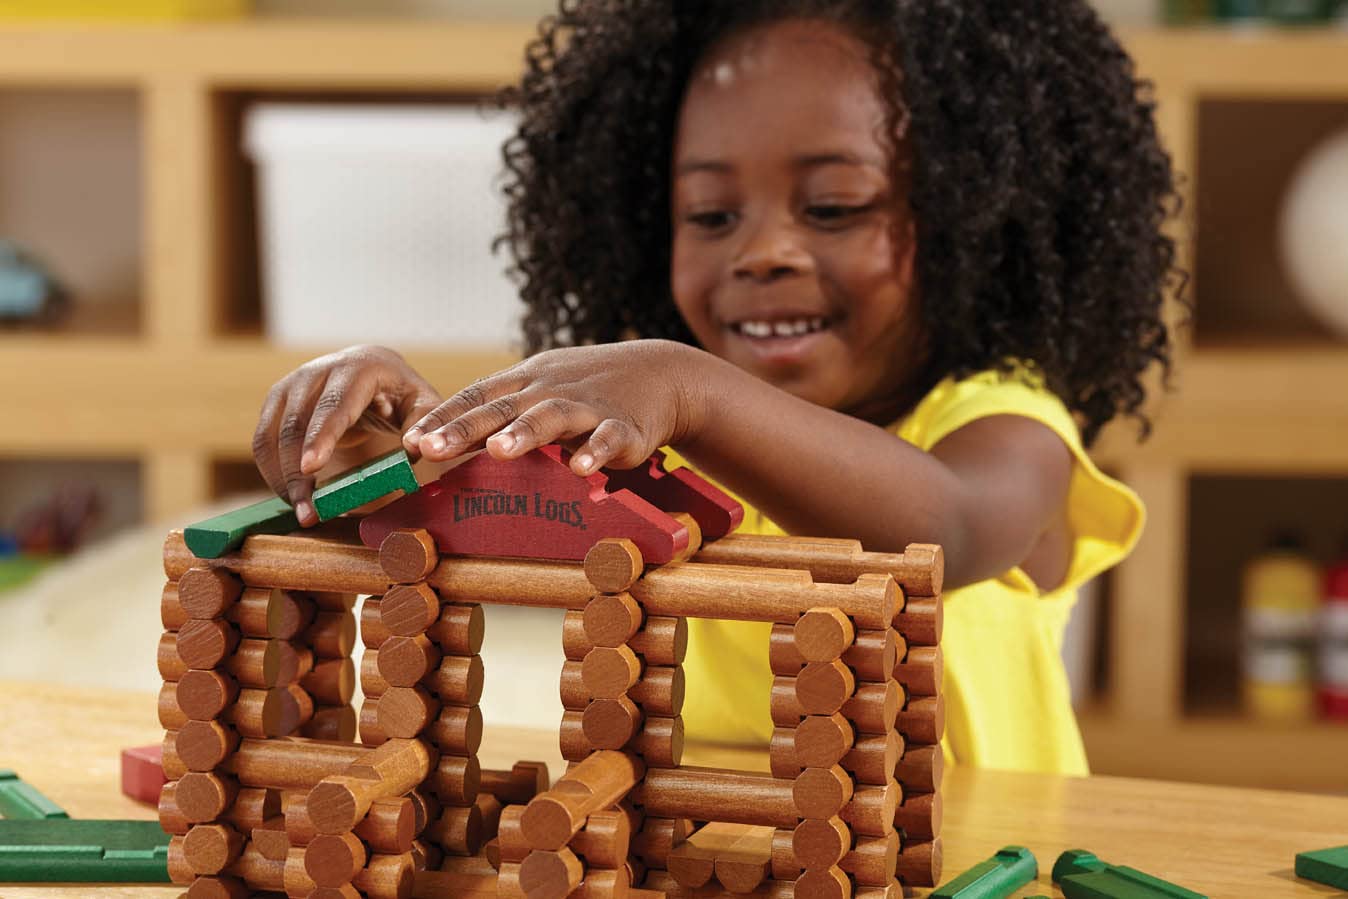 Lincoln Logs –100th Anniversary Tin-111 Pieces-Real Wood Logs-Ages 3+ - Best Retro Building Gift Set for Boys/Girls - Creative Construction Engineering – Top Blocks Game Kit - Preschool Education Toy, Brown (854)